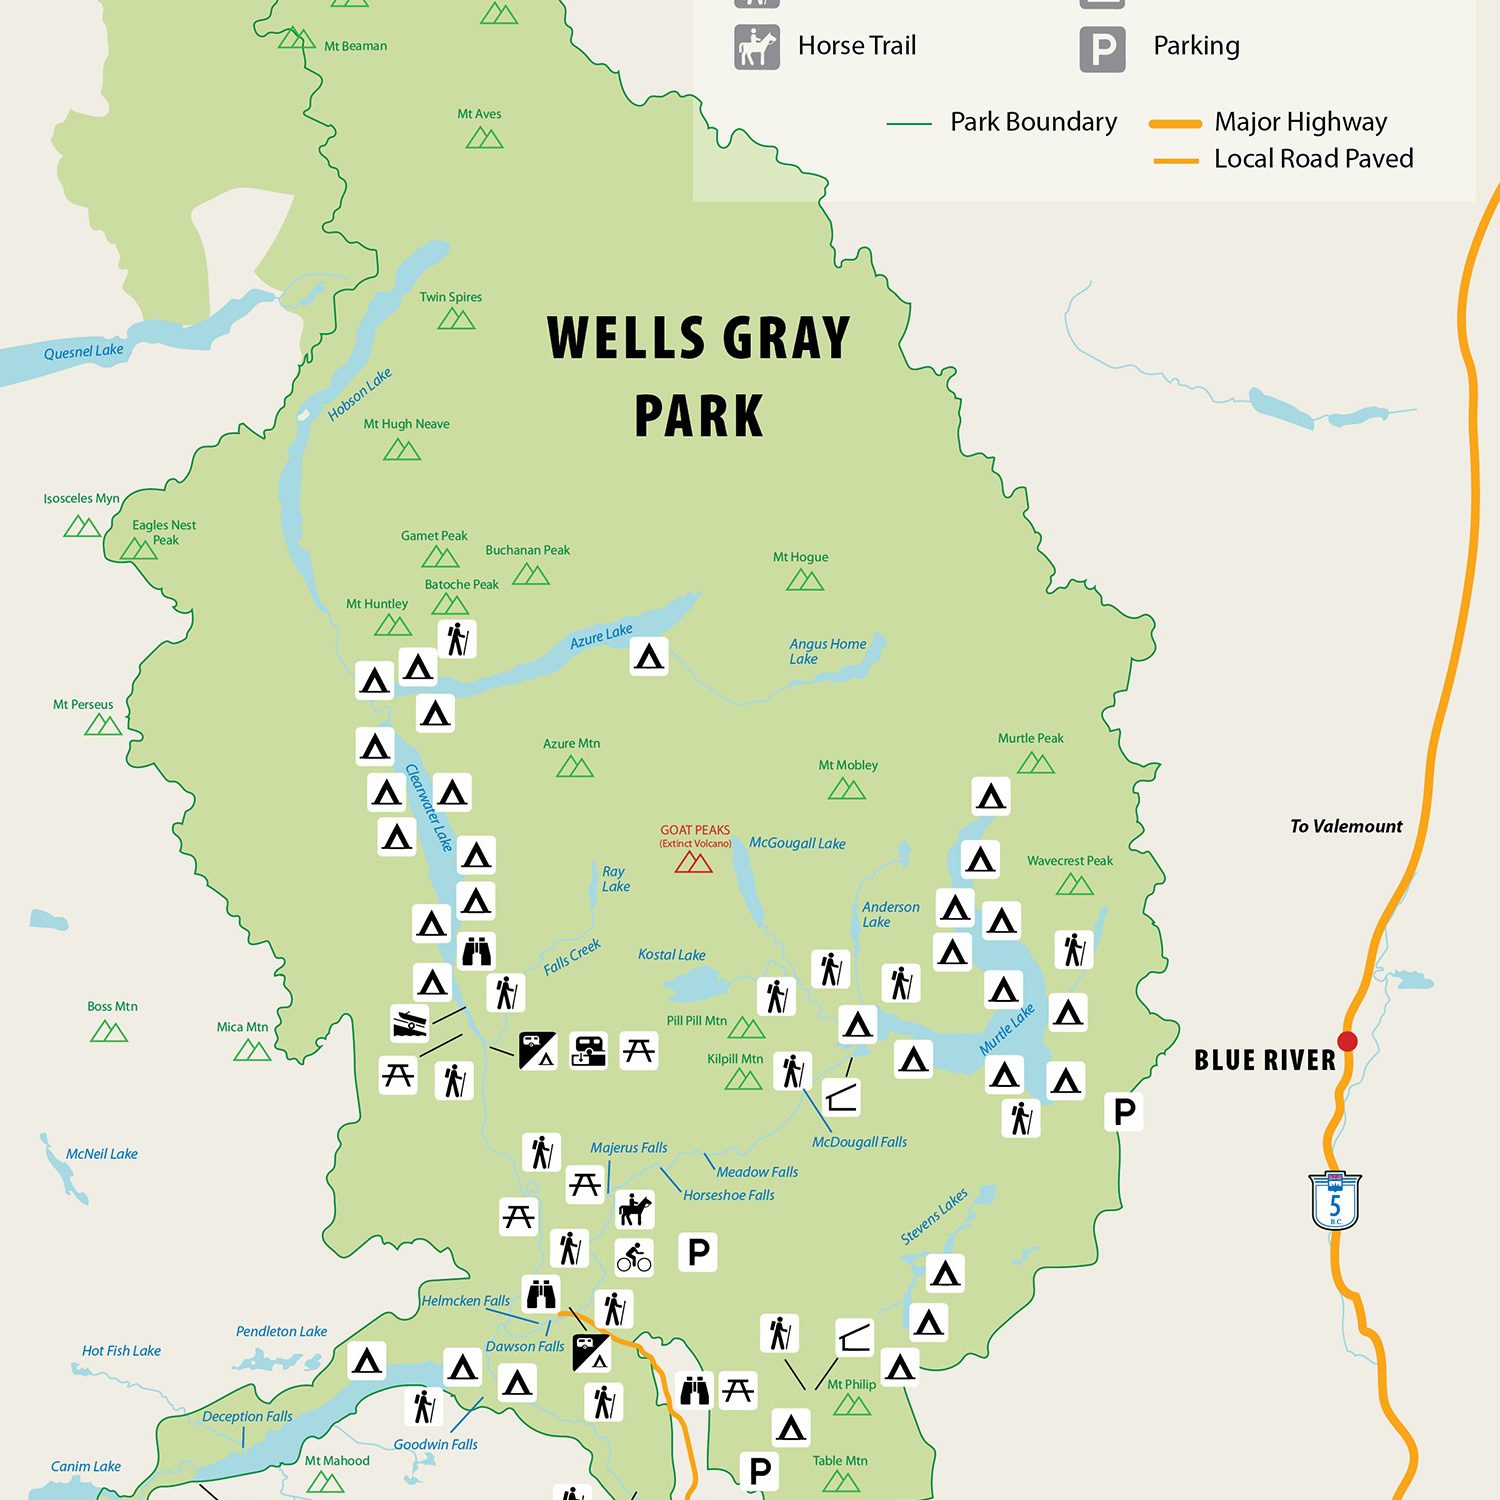 Wells Gray Park overview map